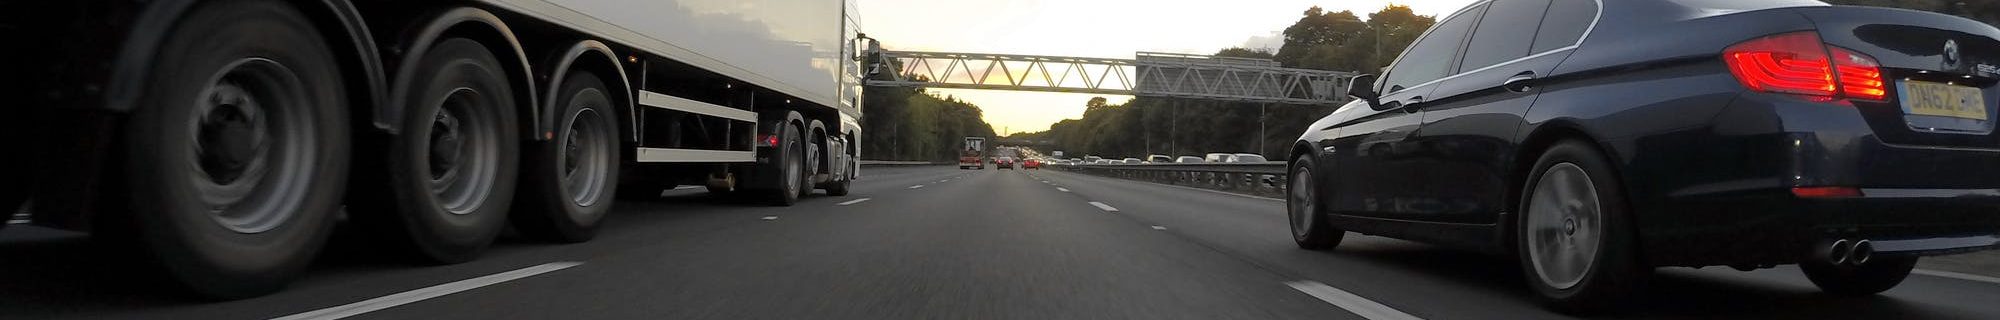 Semi truck Driving on highway Liberty Moves Moving Company